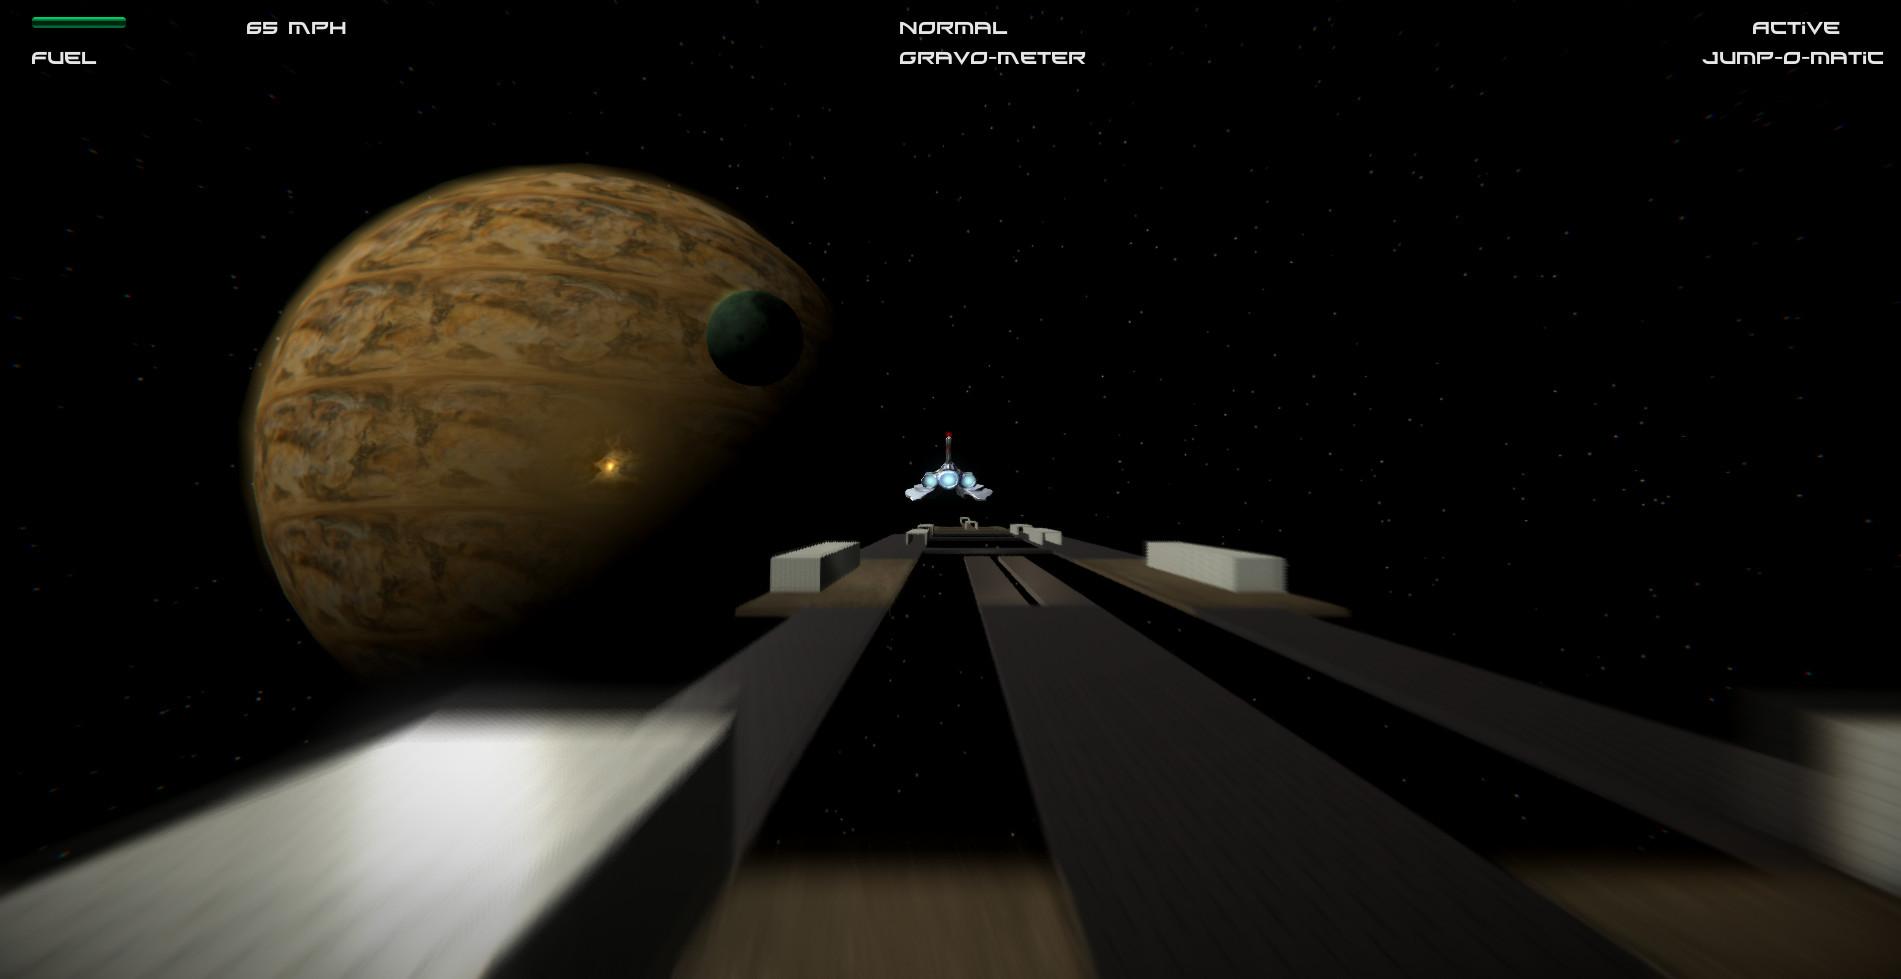 Screenshot №2 from game SpaceRoads